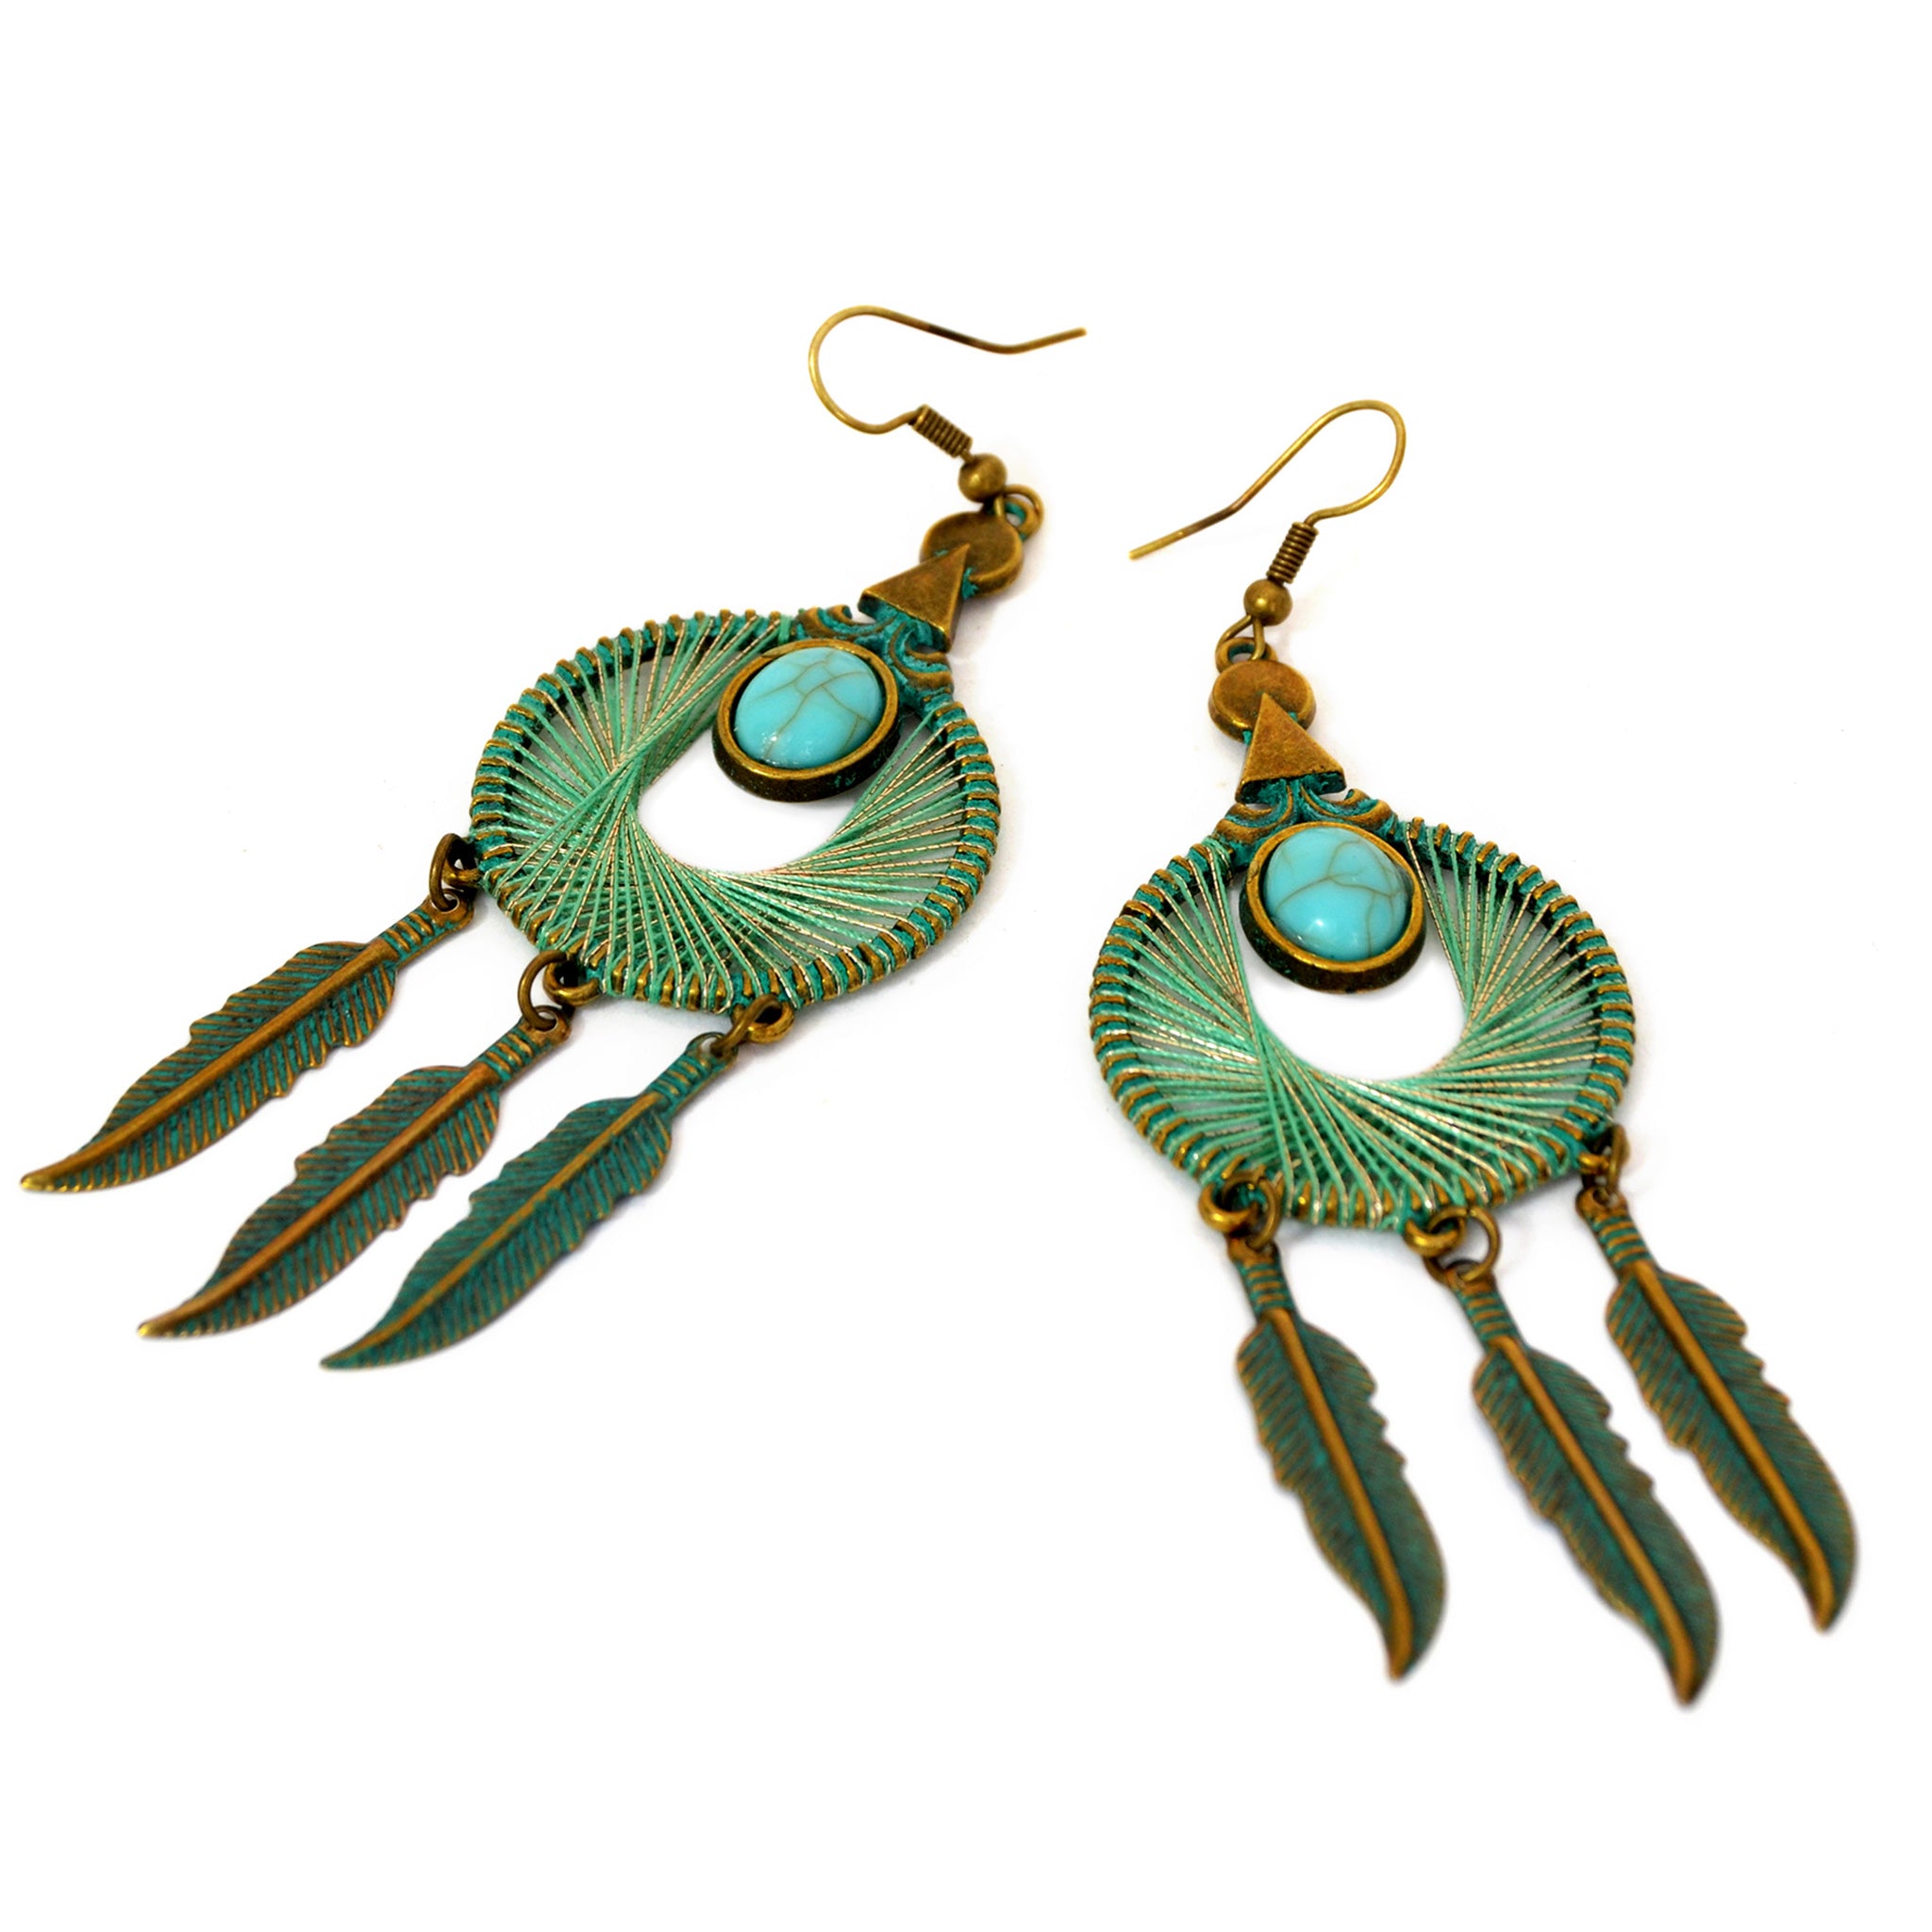 Tassel earrings with blue and gold wrapped strings on hoop, turquoise bead and hanging feathers